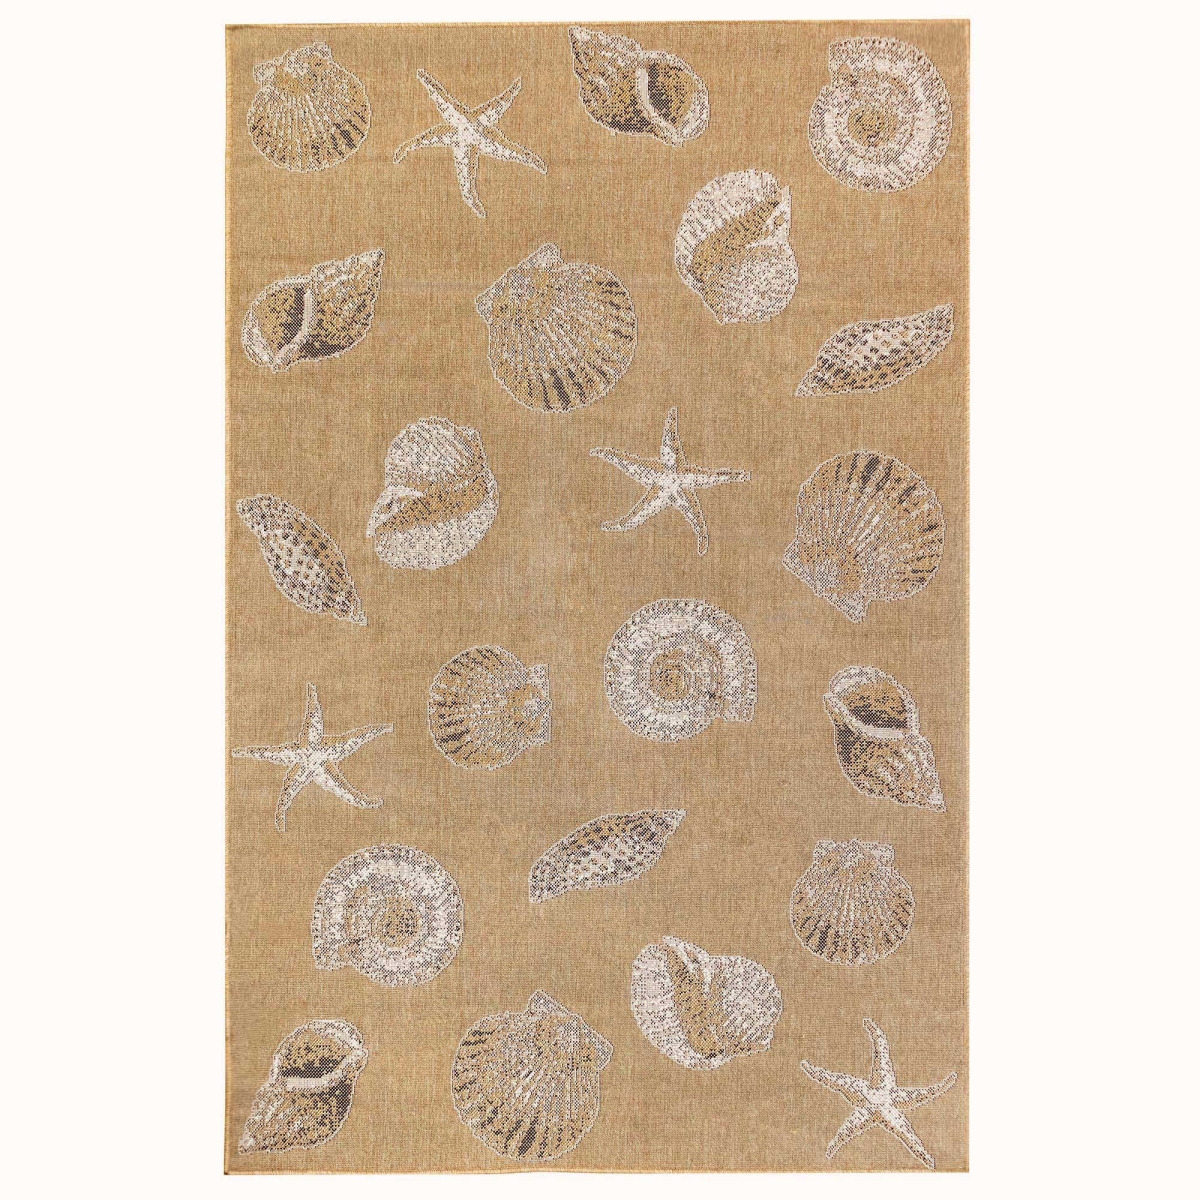 Trans-ocean Imports Cre45841412 39 In. X 59 In. Liora Manne Carmel Shells Indoor & Outdoor Wilton Woven Rectangle Rug - Sand